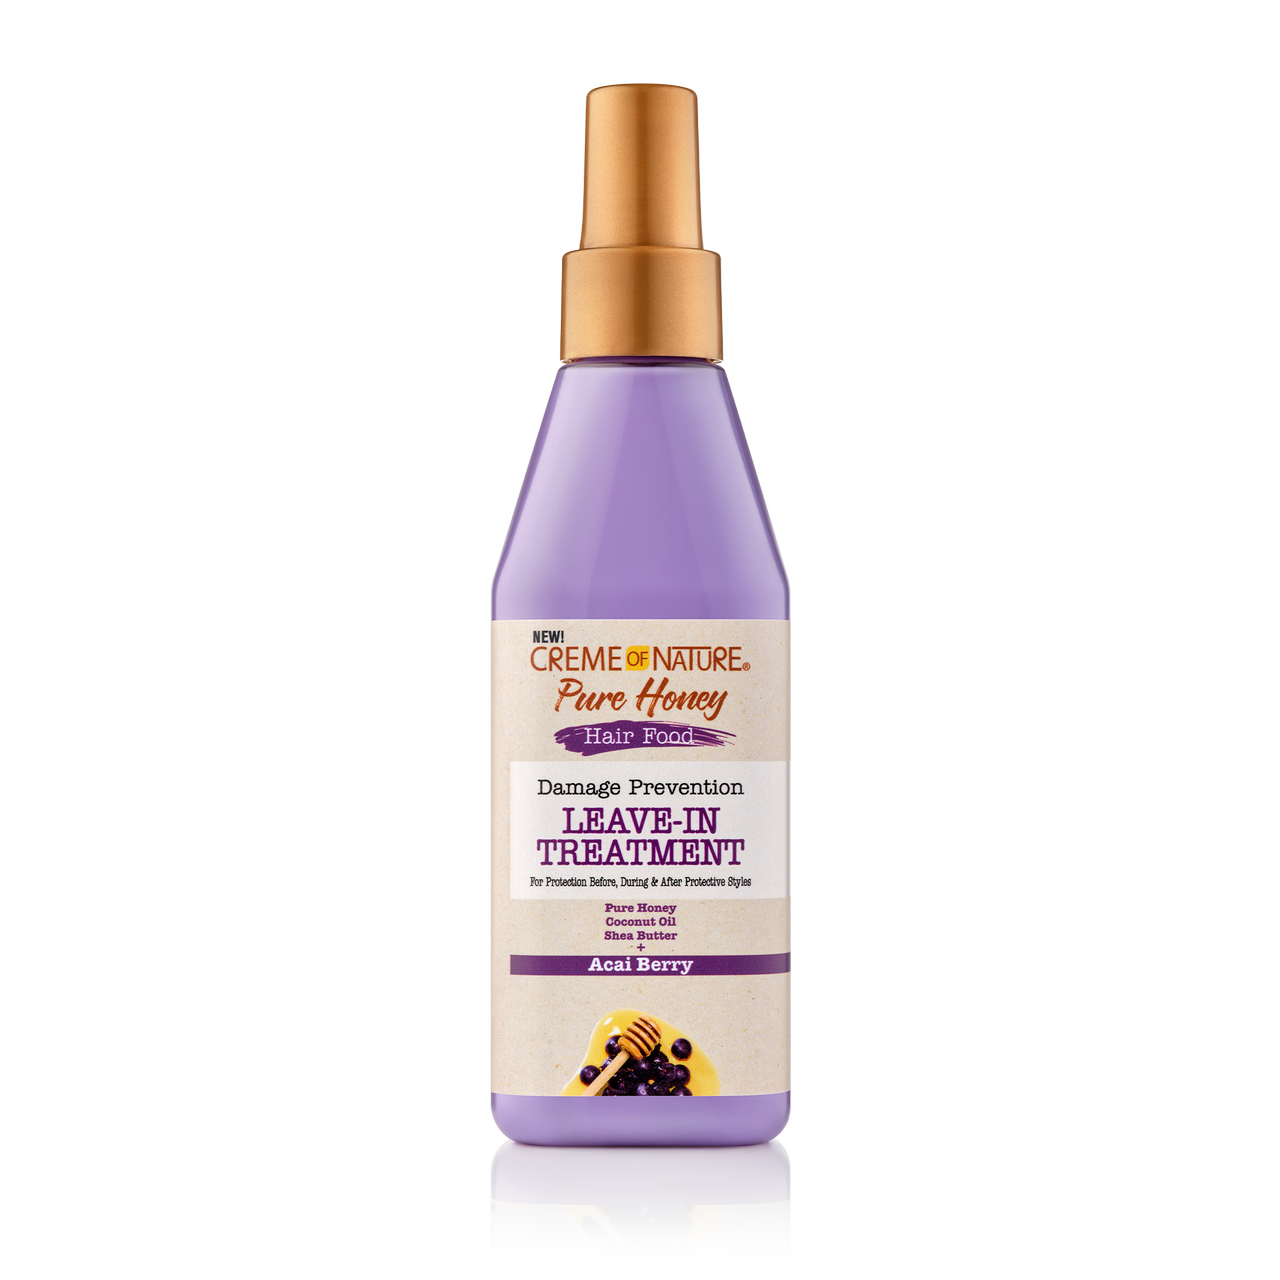 Creme of nature Damage Prevention Leave-In Treatment acai berry